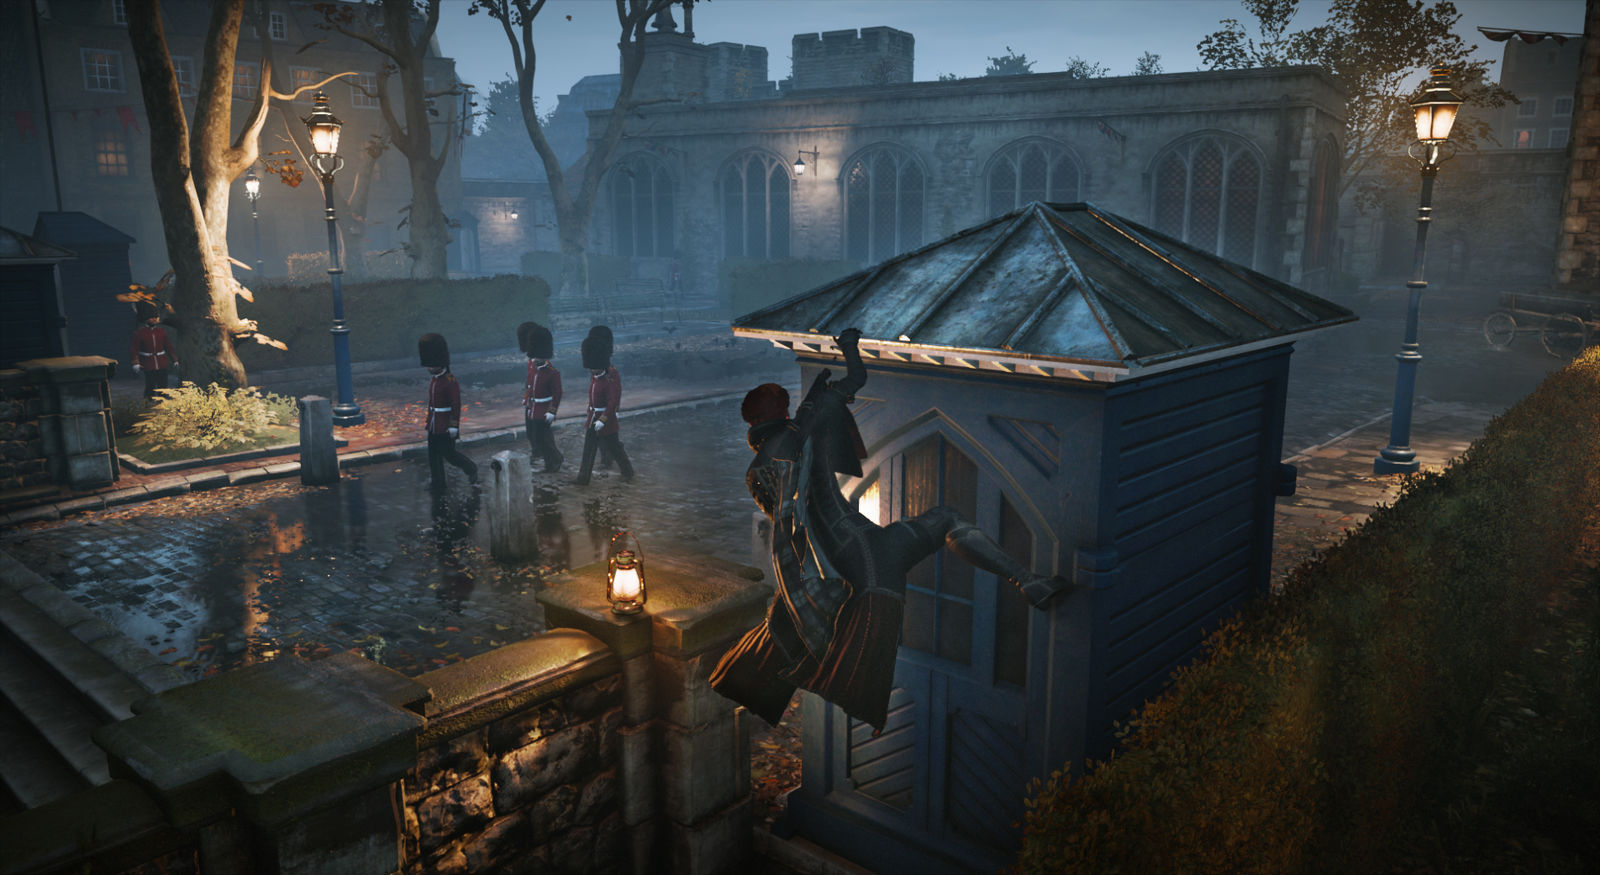 Assassin´s Creed Syndicate (Uplay) RU/CIS